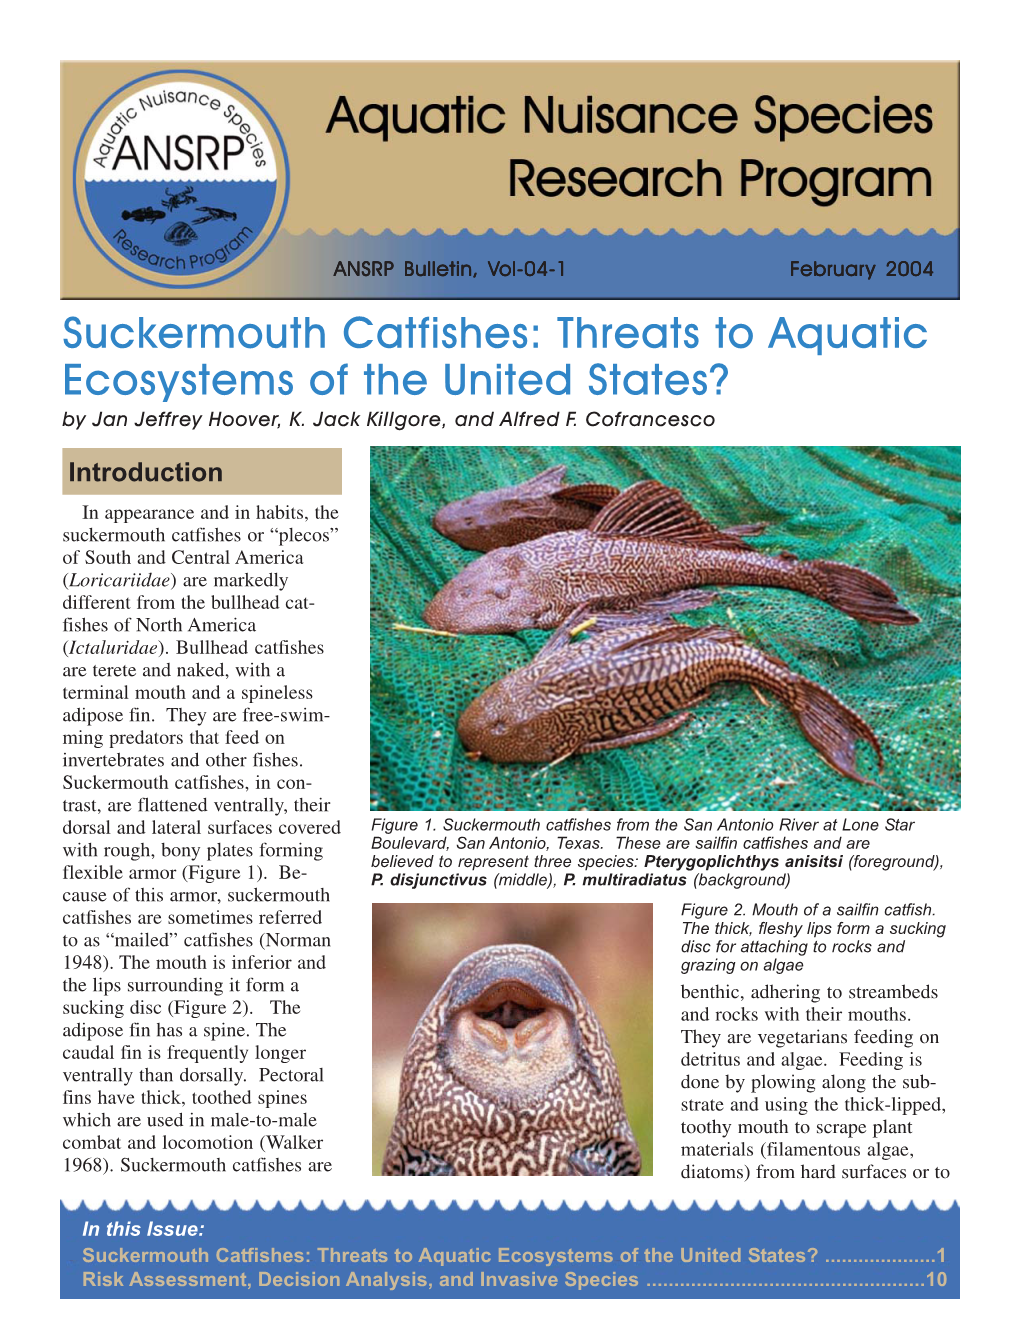 Suckermouth Catfishes: Threats to Aquatic Ecosystems of the United States? by Jan Jeffrey Hoover, K